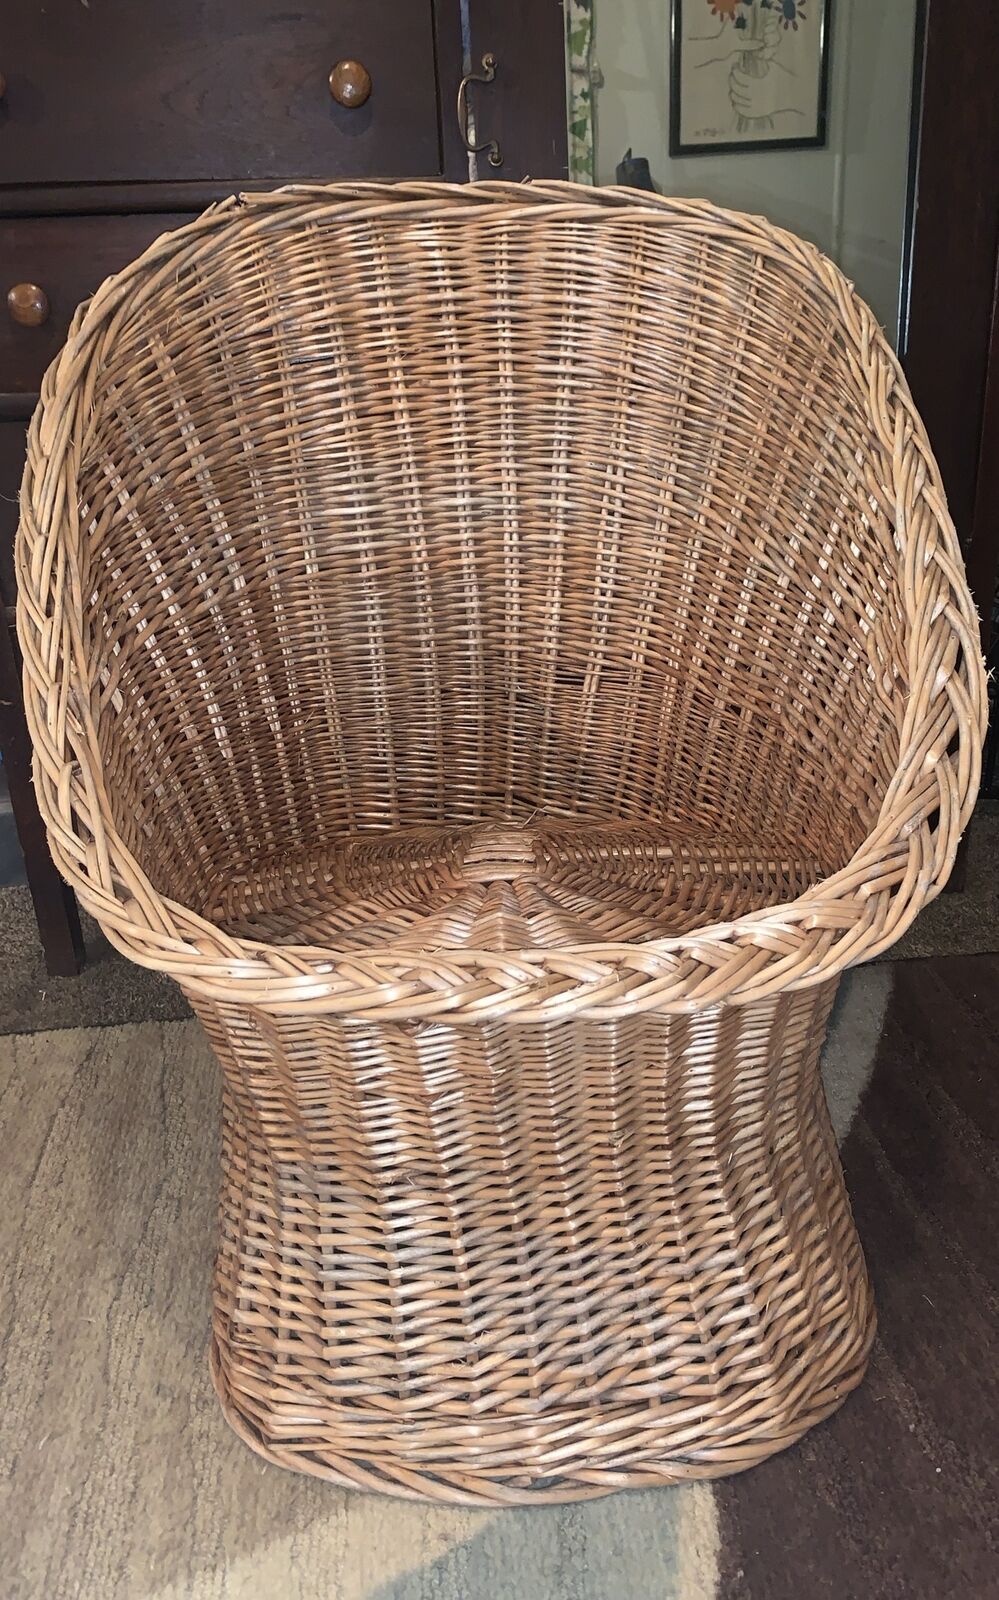 Vtg Wicker/Rattan  “Egg” Barrel Chair  Excellent Preowned Condition/No Cushion